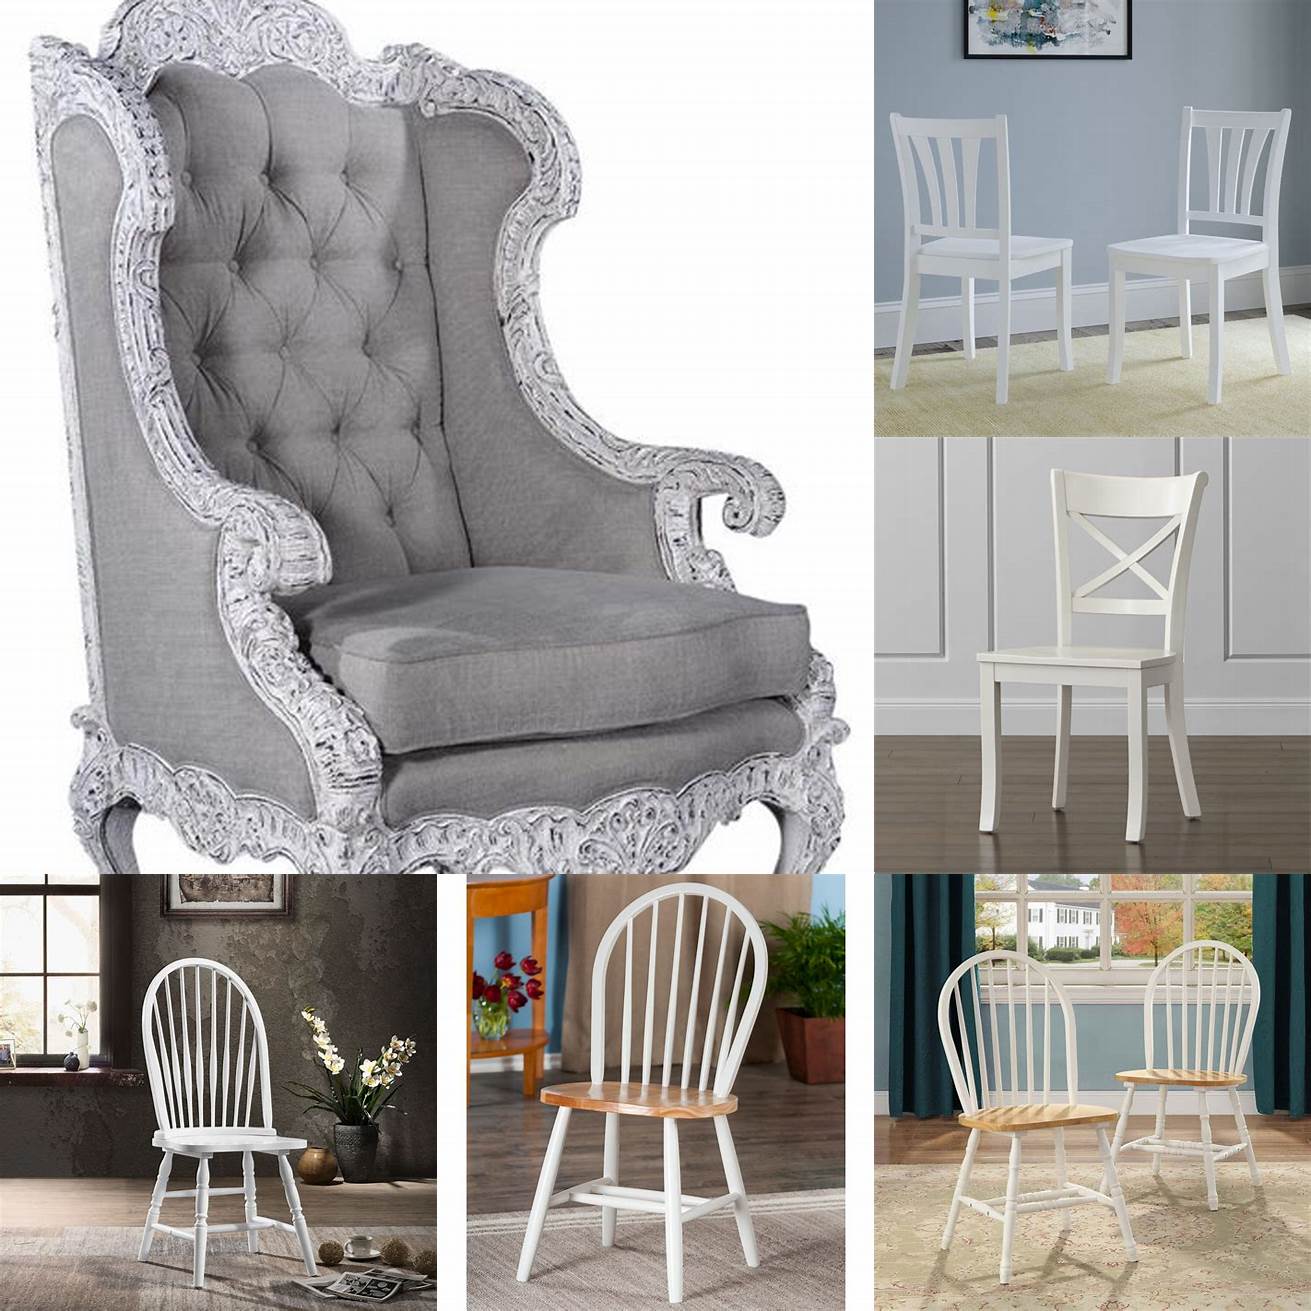 White wooden chairs with intricate details